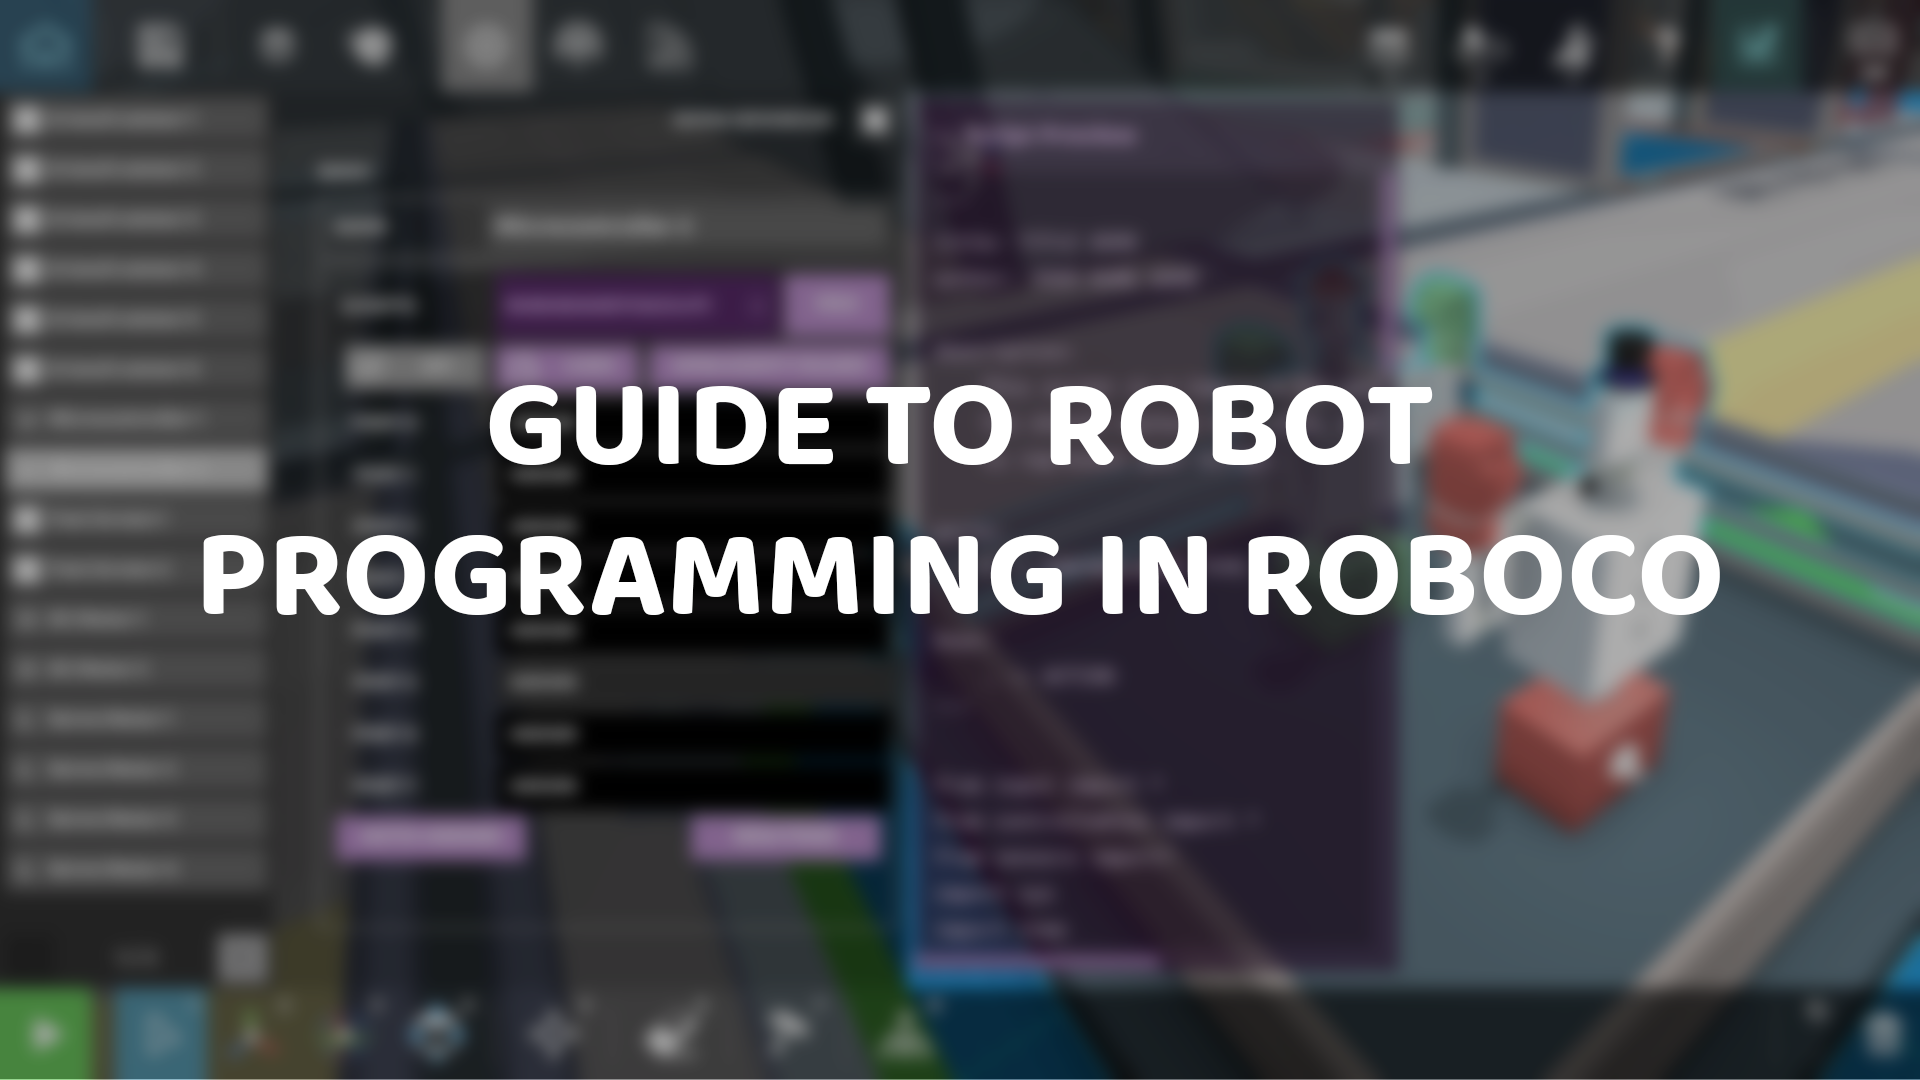 A Guide to Robot Programming